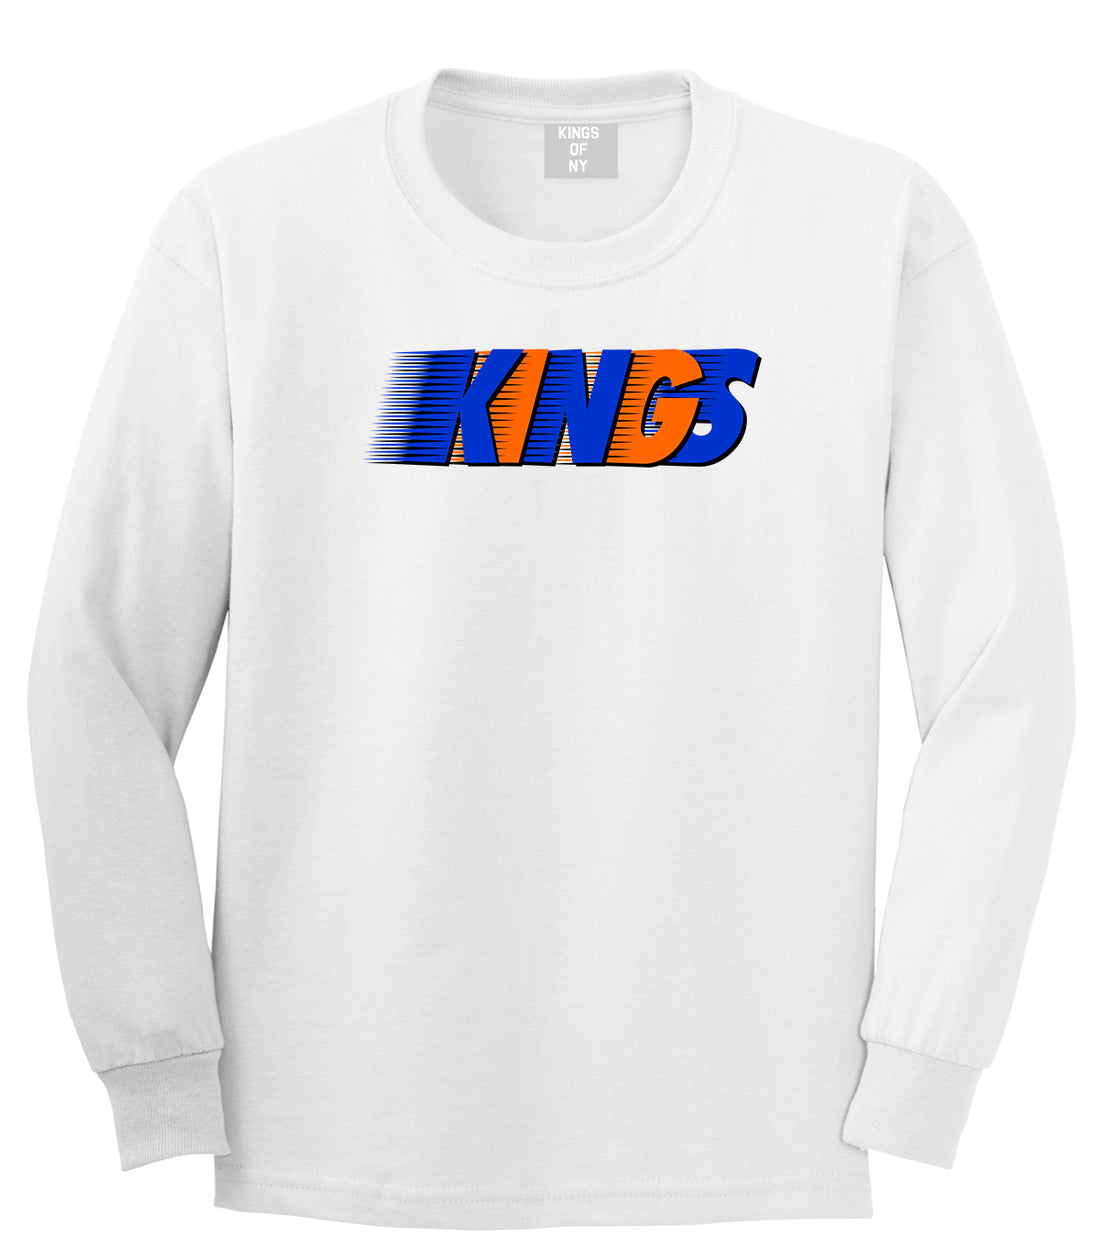 KINGS NY Colors Long Sleeve T-Shirt in White